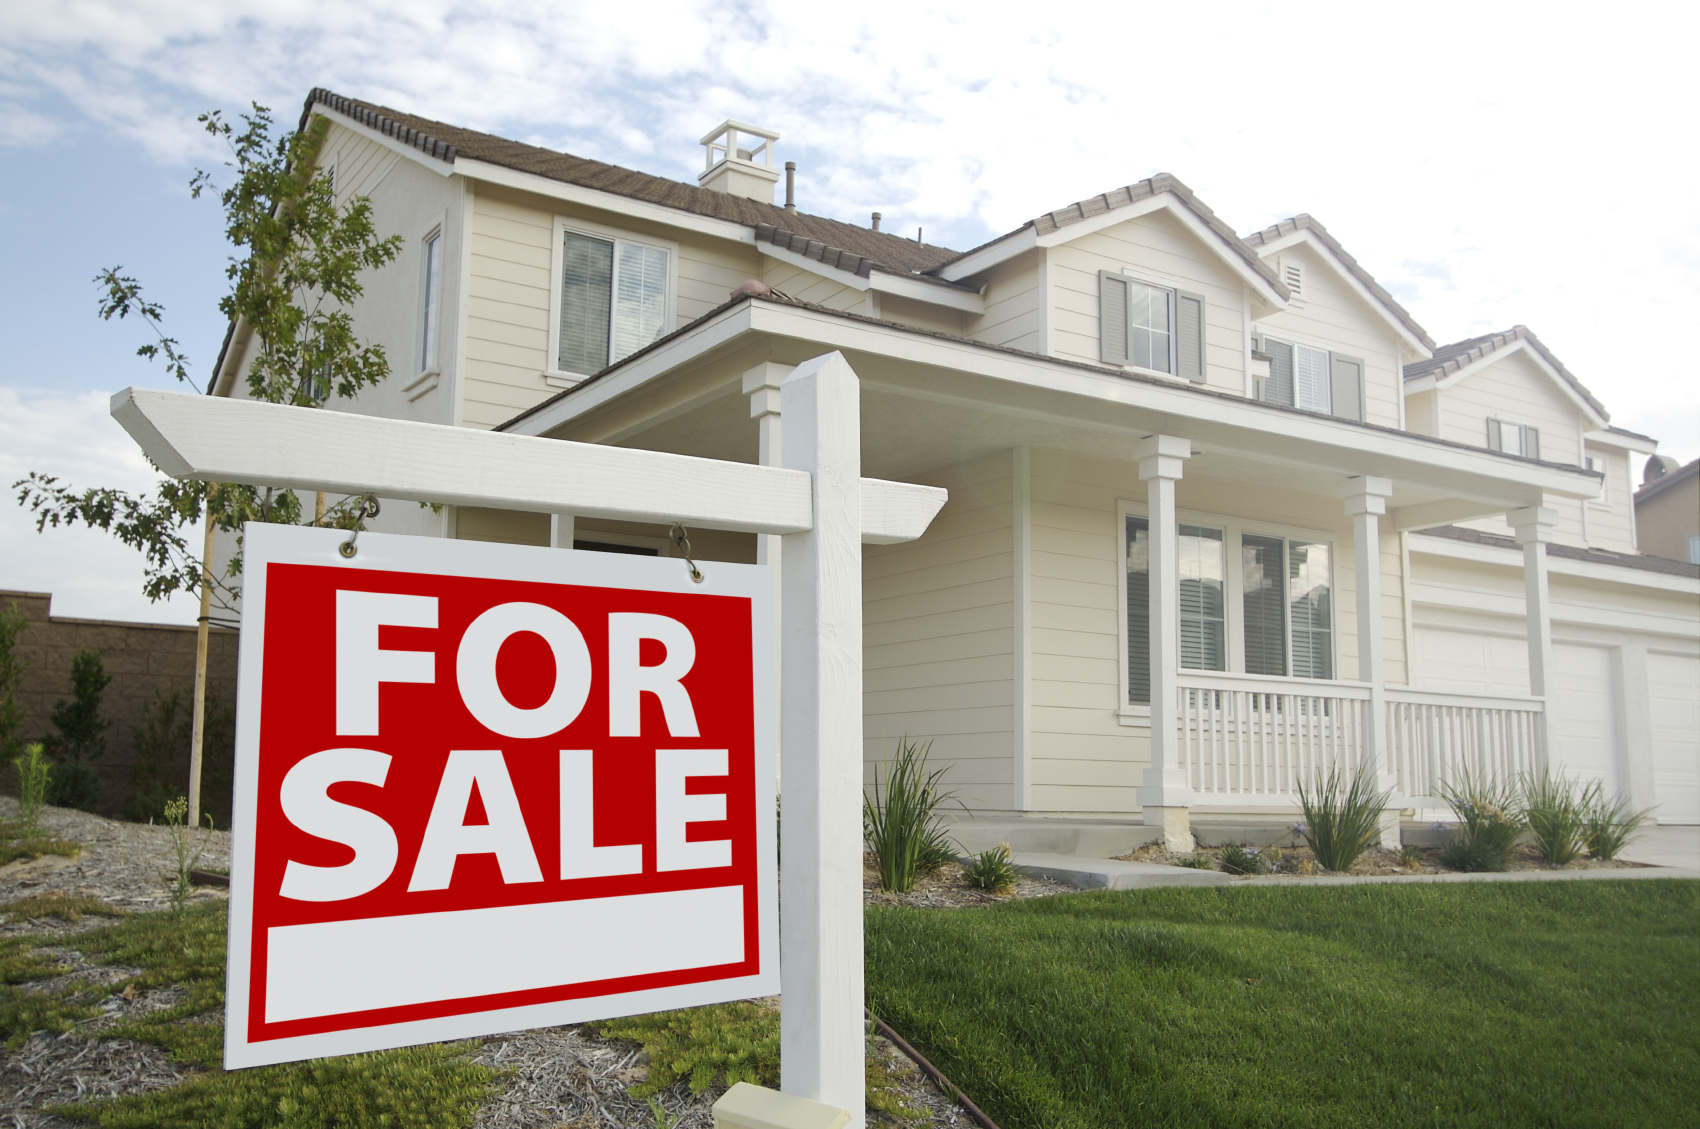 Illinois housing market swings into spring with jump in home sales, prices